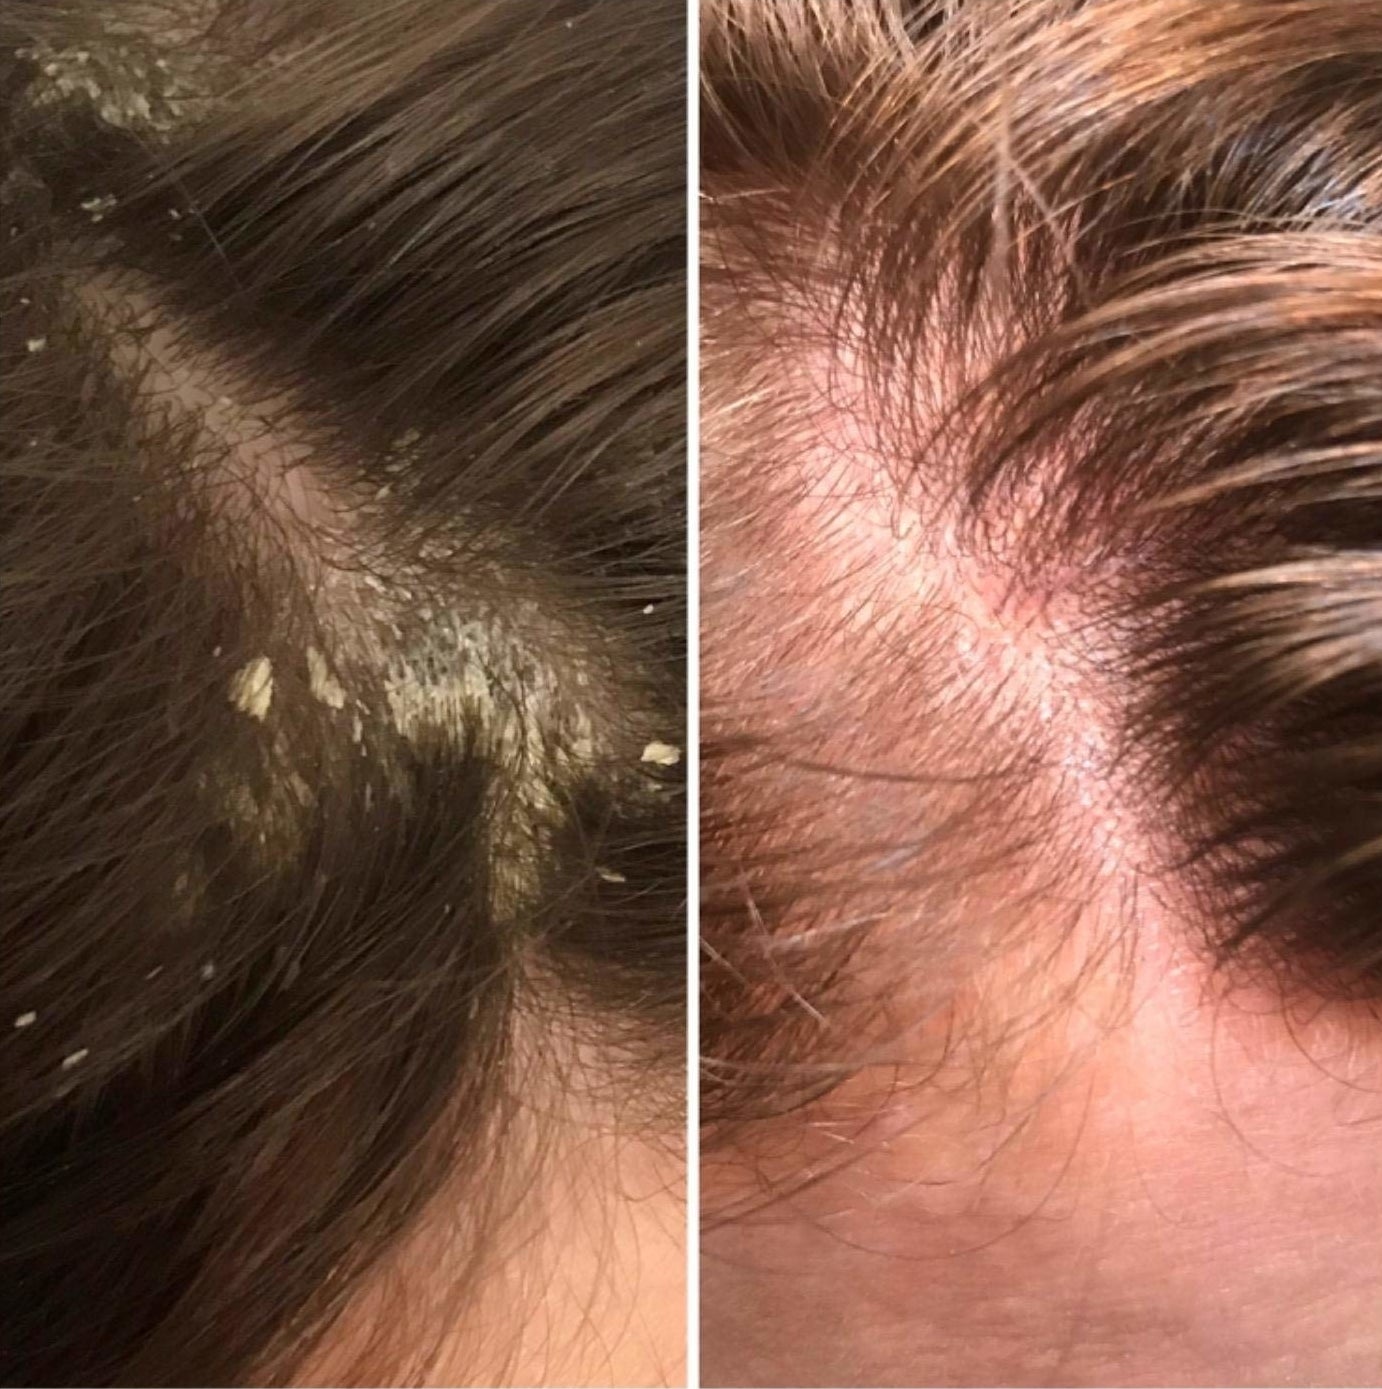 Reviewer images showing scalp before and after using the shampoo. The before photo shows lots of dandruff while the after photo shows a clear scalp